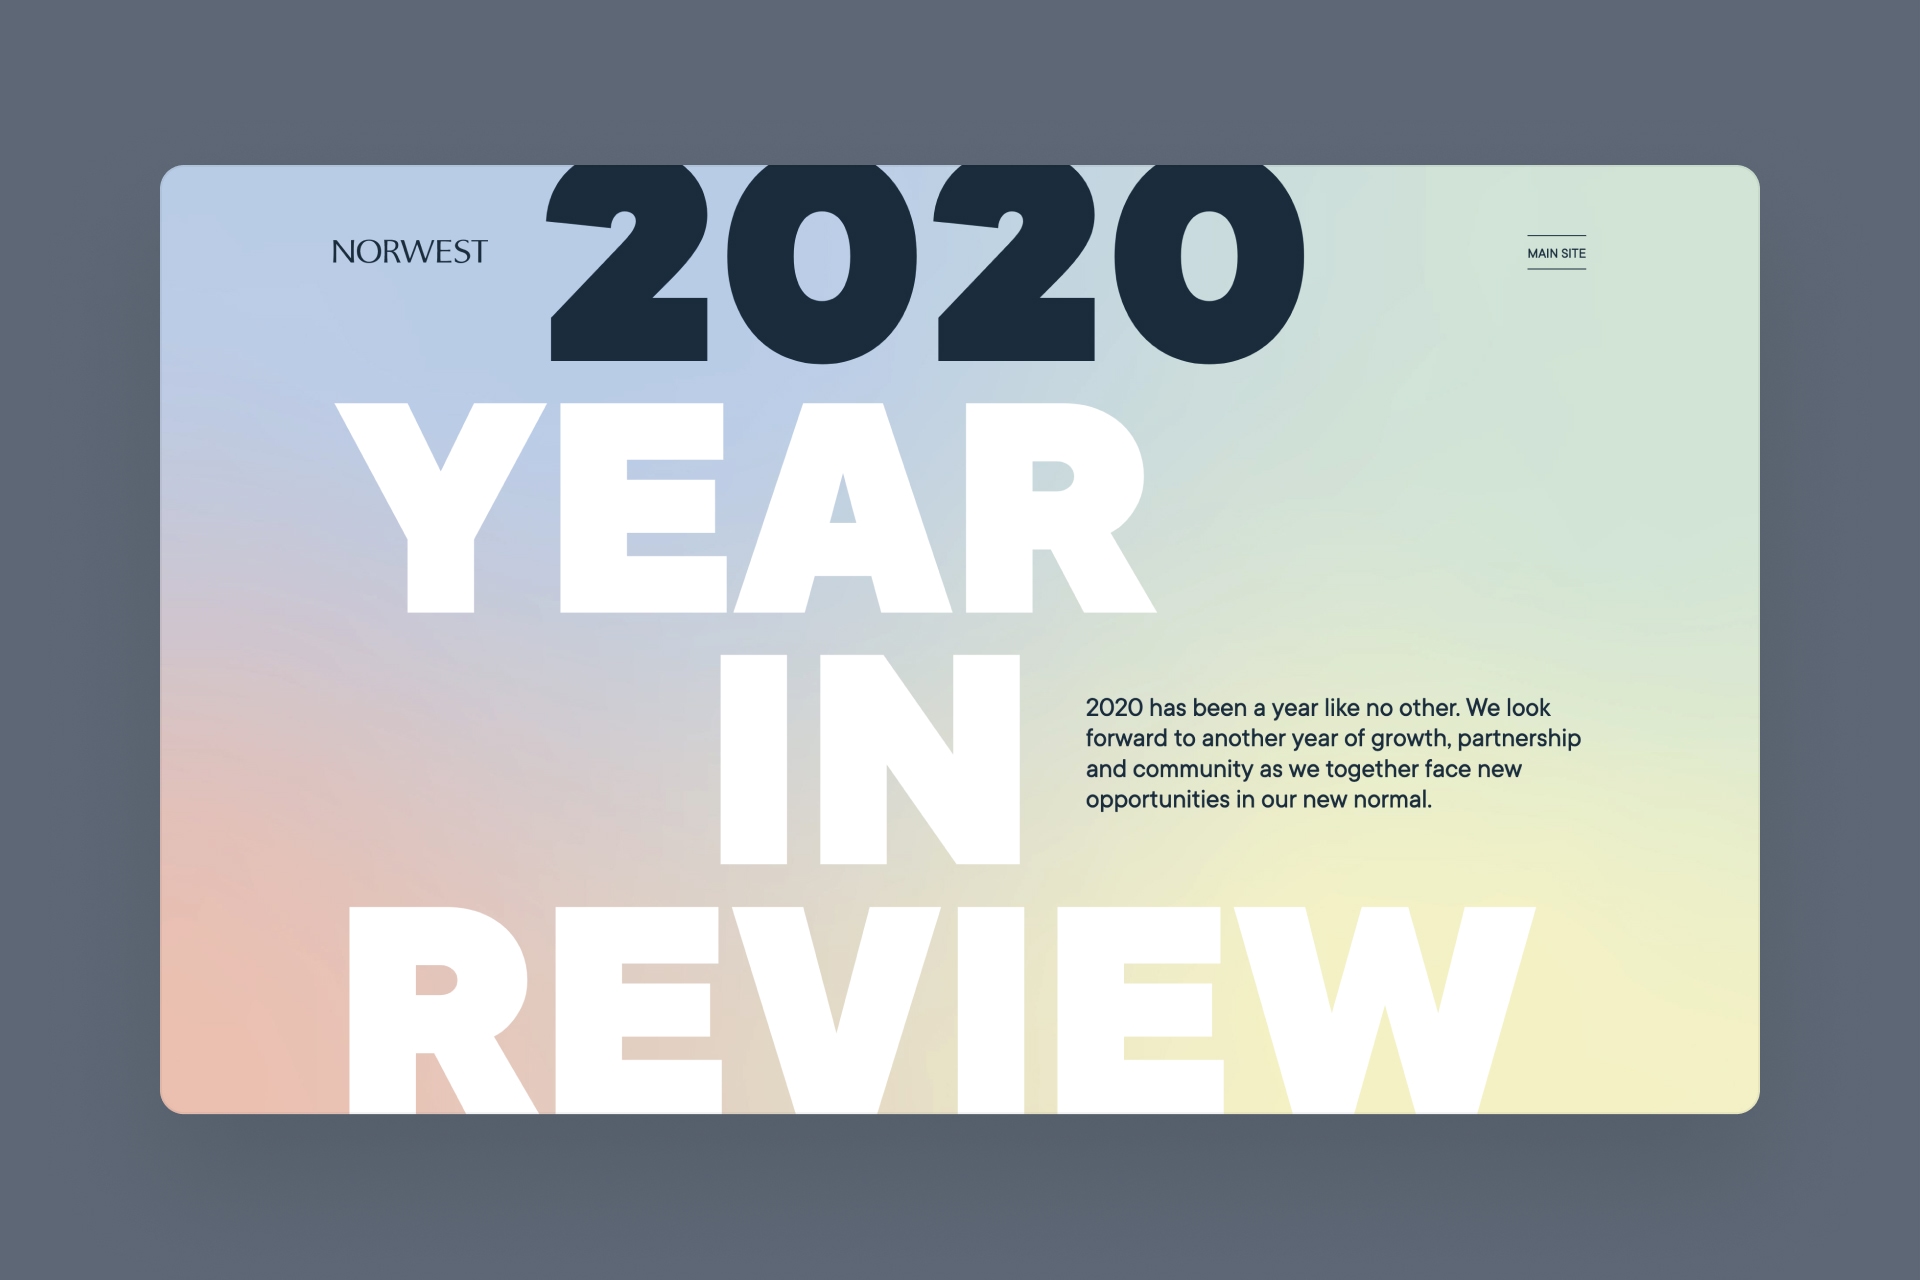 A screenshot of the Norwest 2020 Year in Review Landing Page